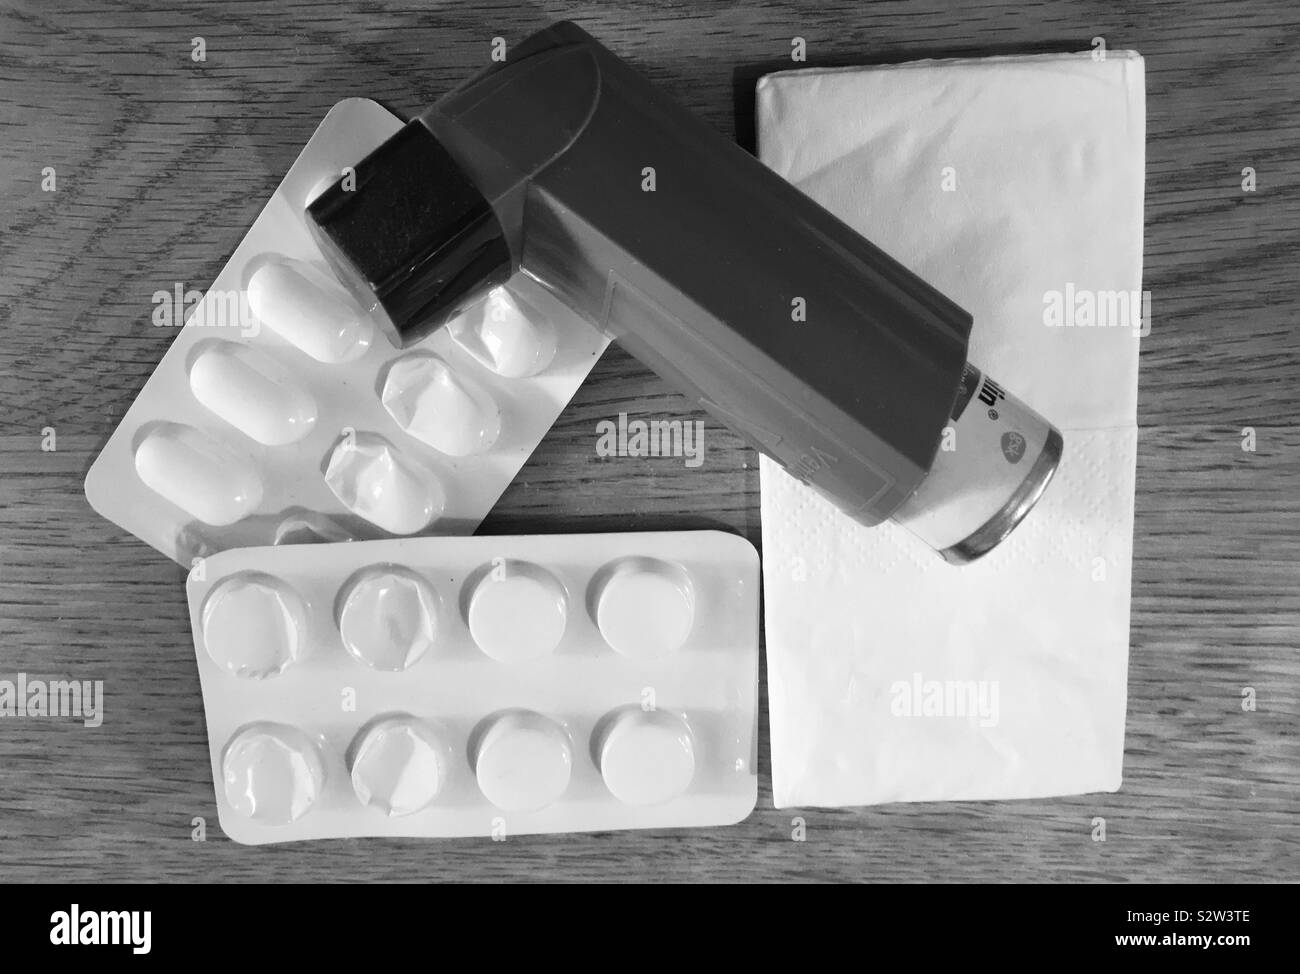 Black and white medicines for chest infection and cold /‘flu Stock Photo